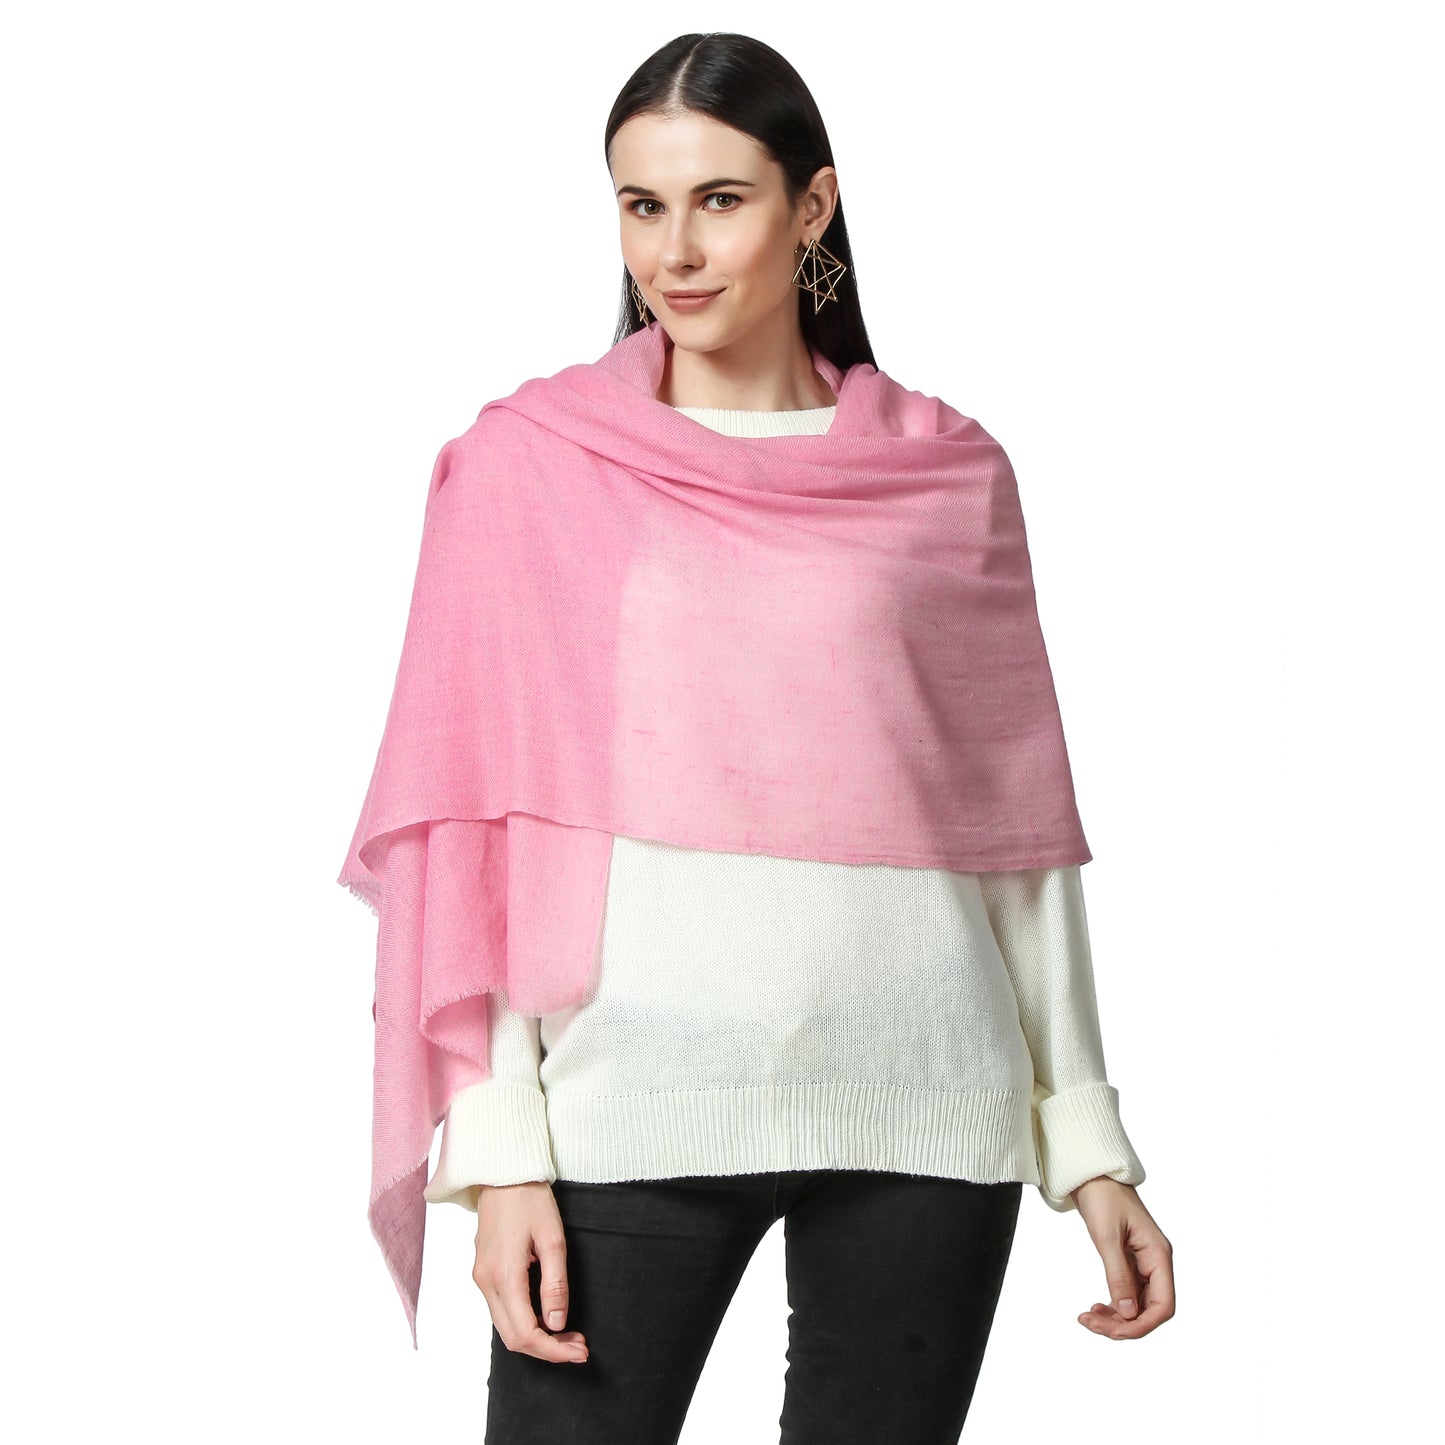 Cashmere Scarf Handwoven (Pink)